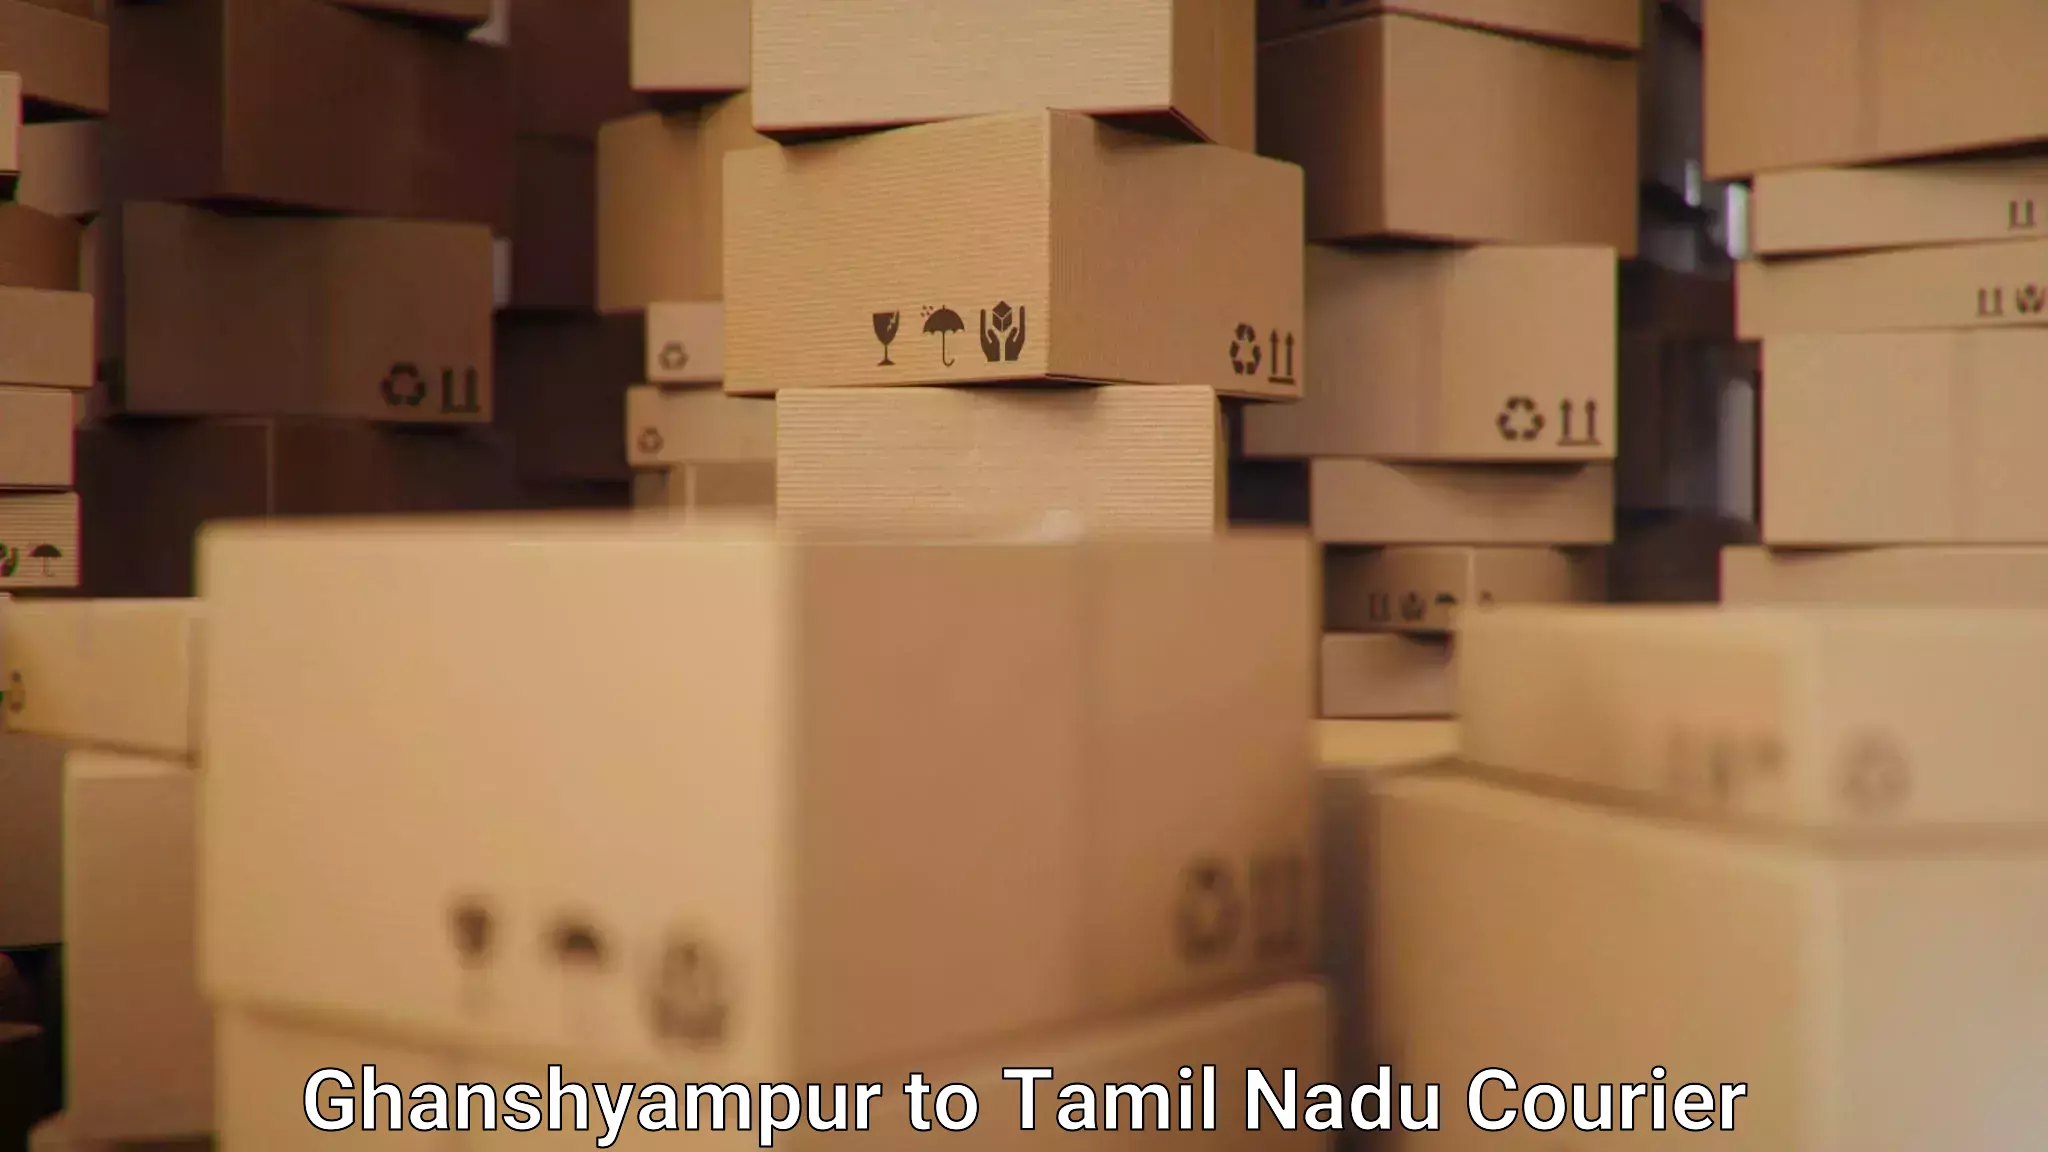 Fast-track shipping solutions Ghanshyampur to Tuticorin